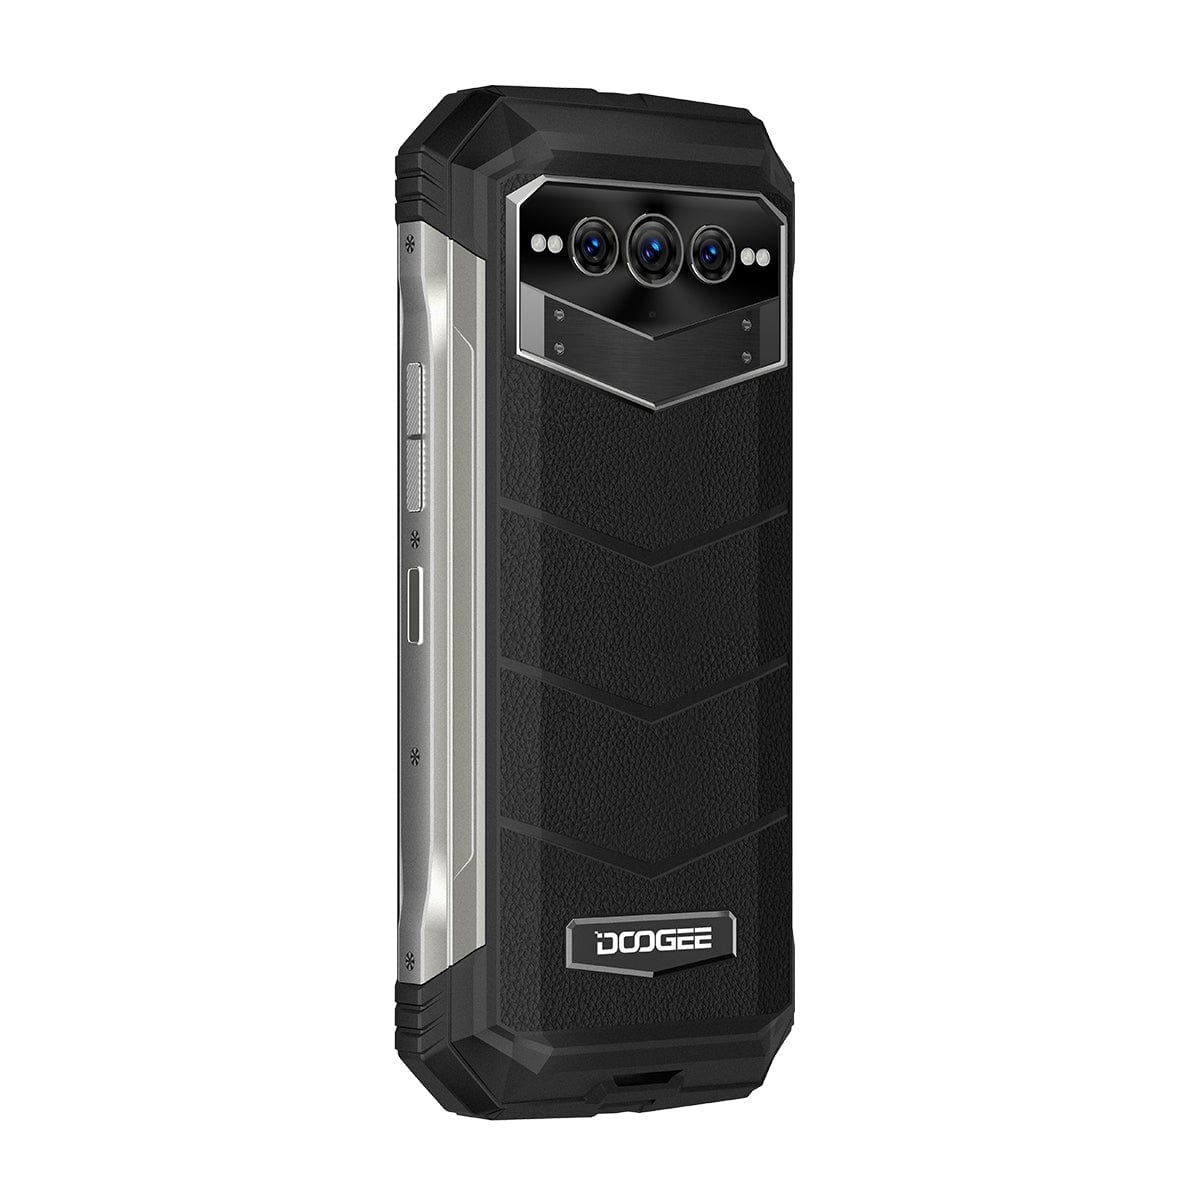 Doogee V Max Leaked: A Whopping 22000mAh Battery and Night Vision Camera! 